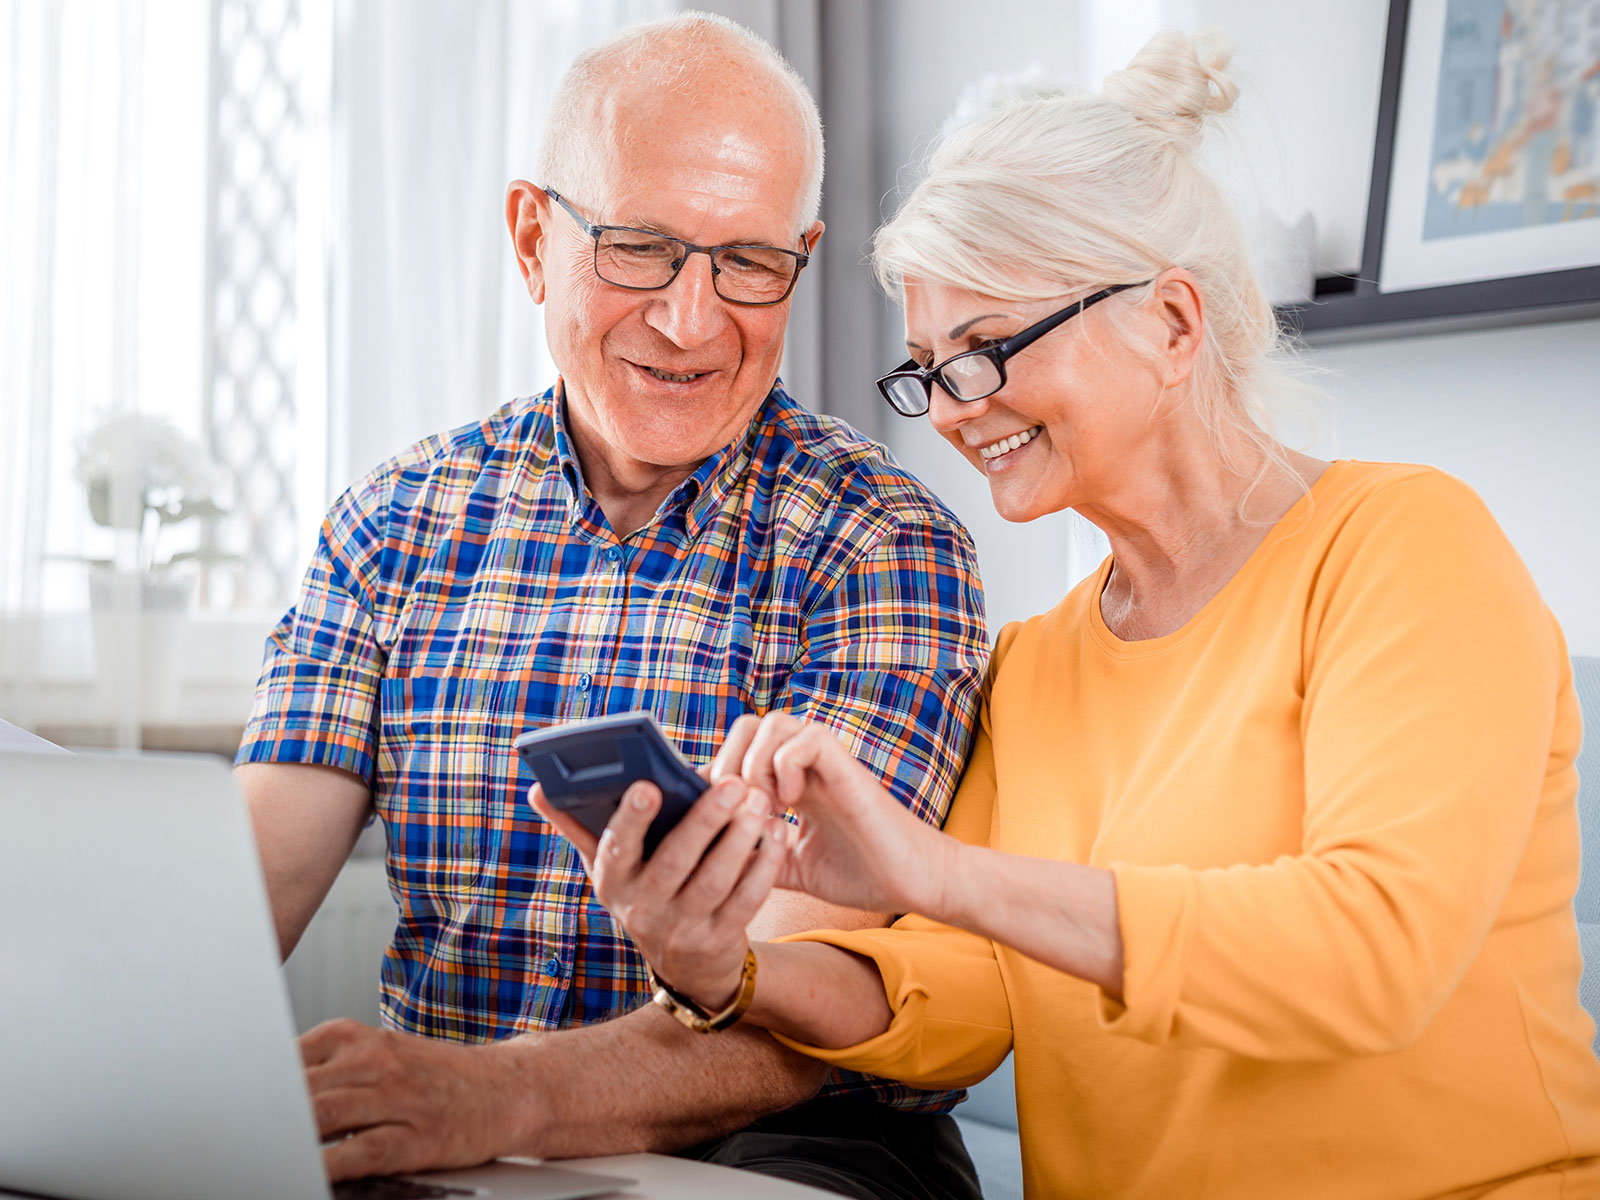 Elderly man and woman using a computer and smartphone.